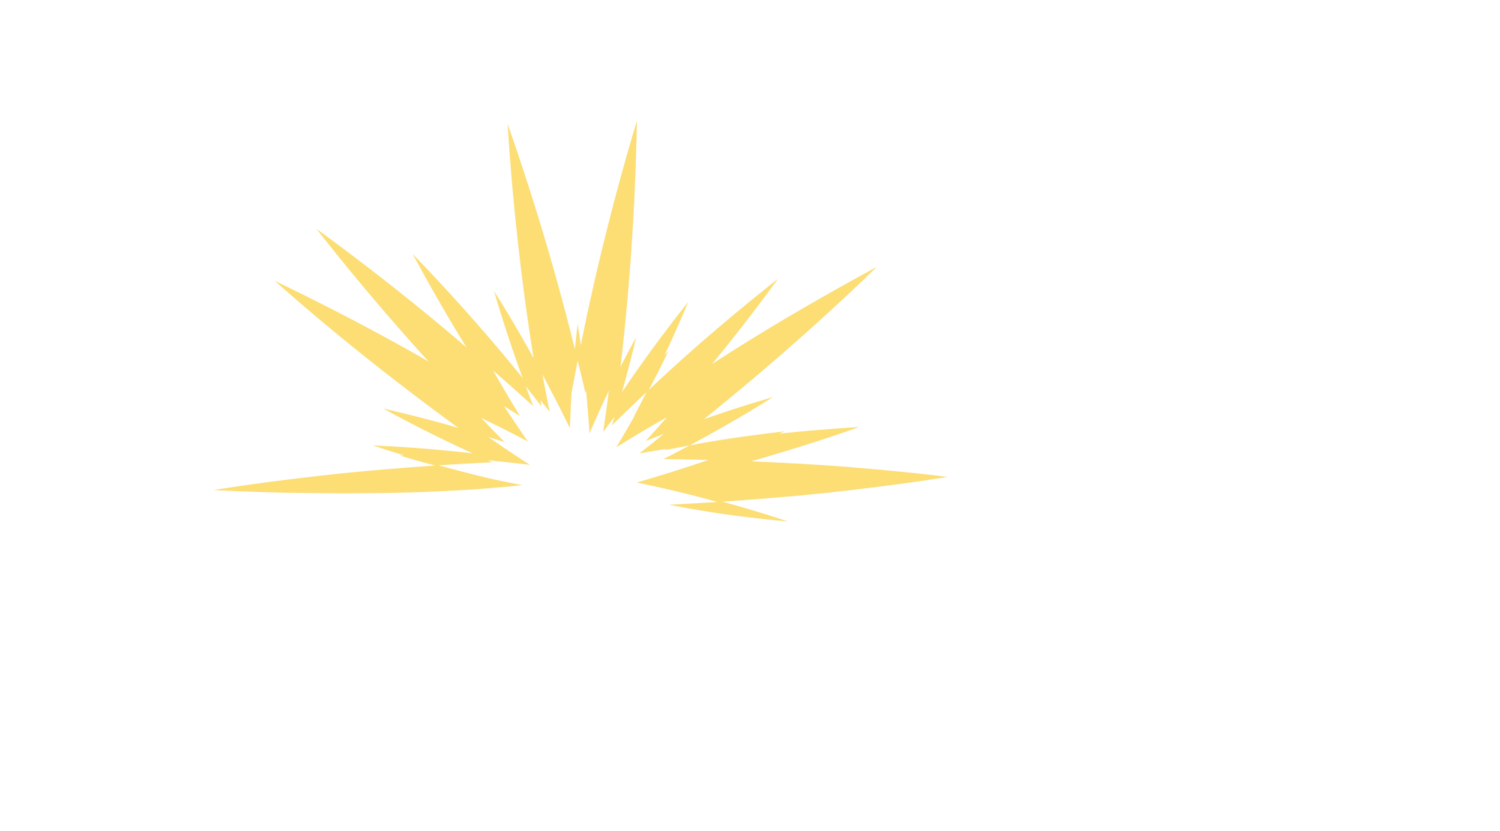 Spark of Play